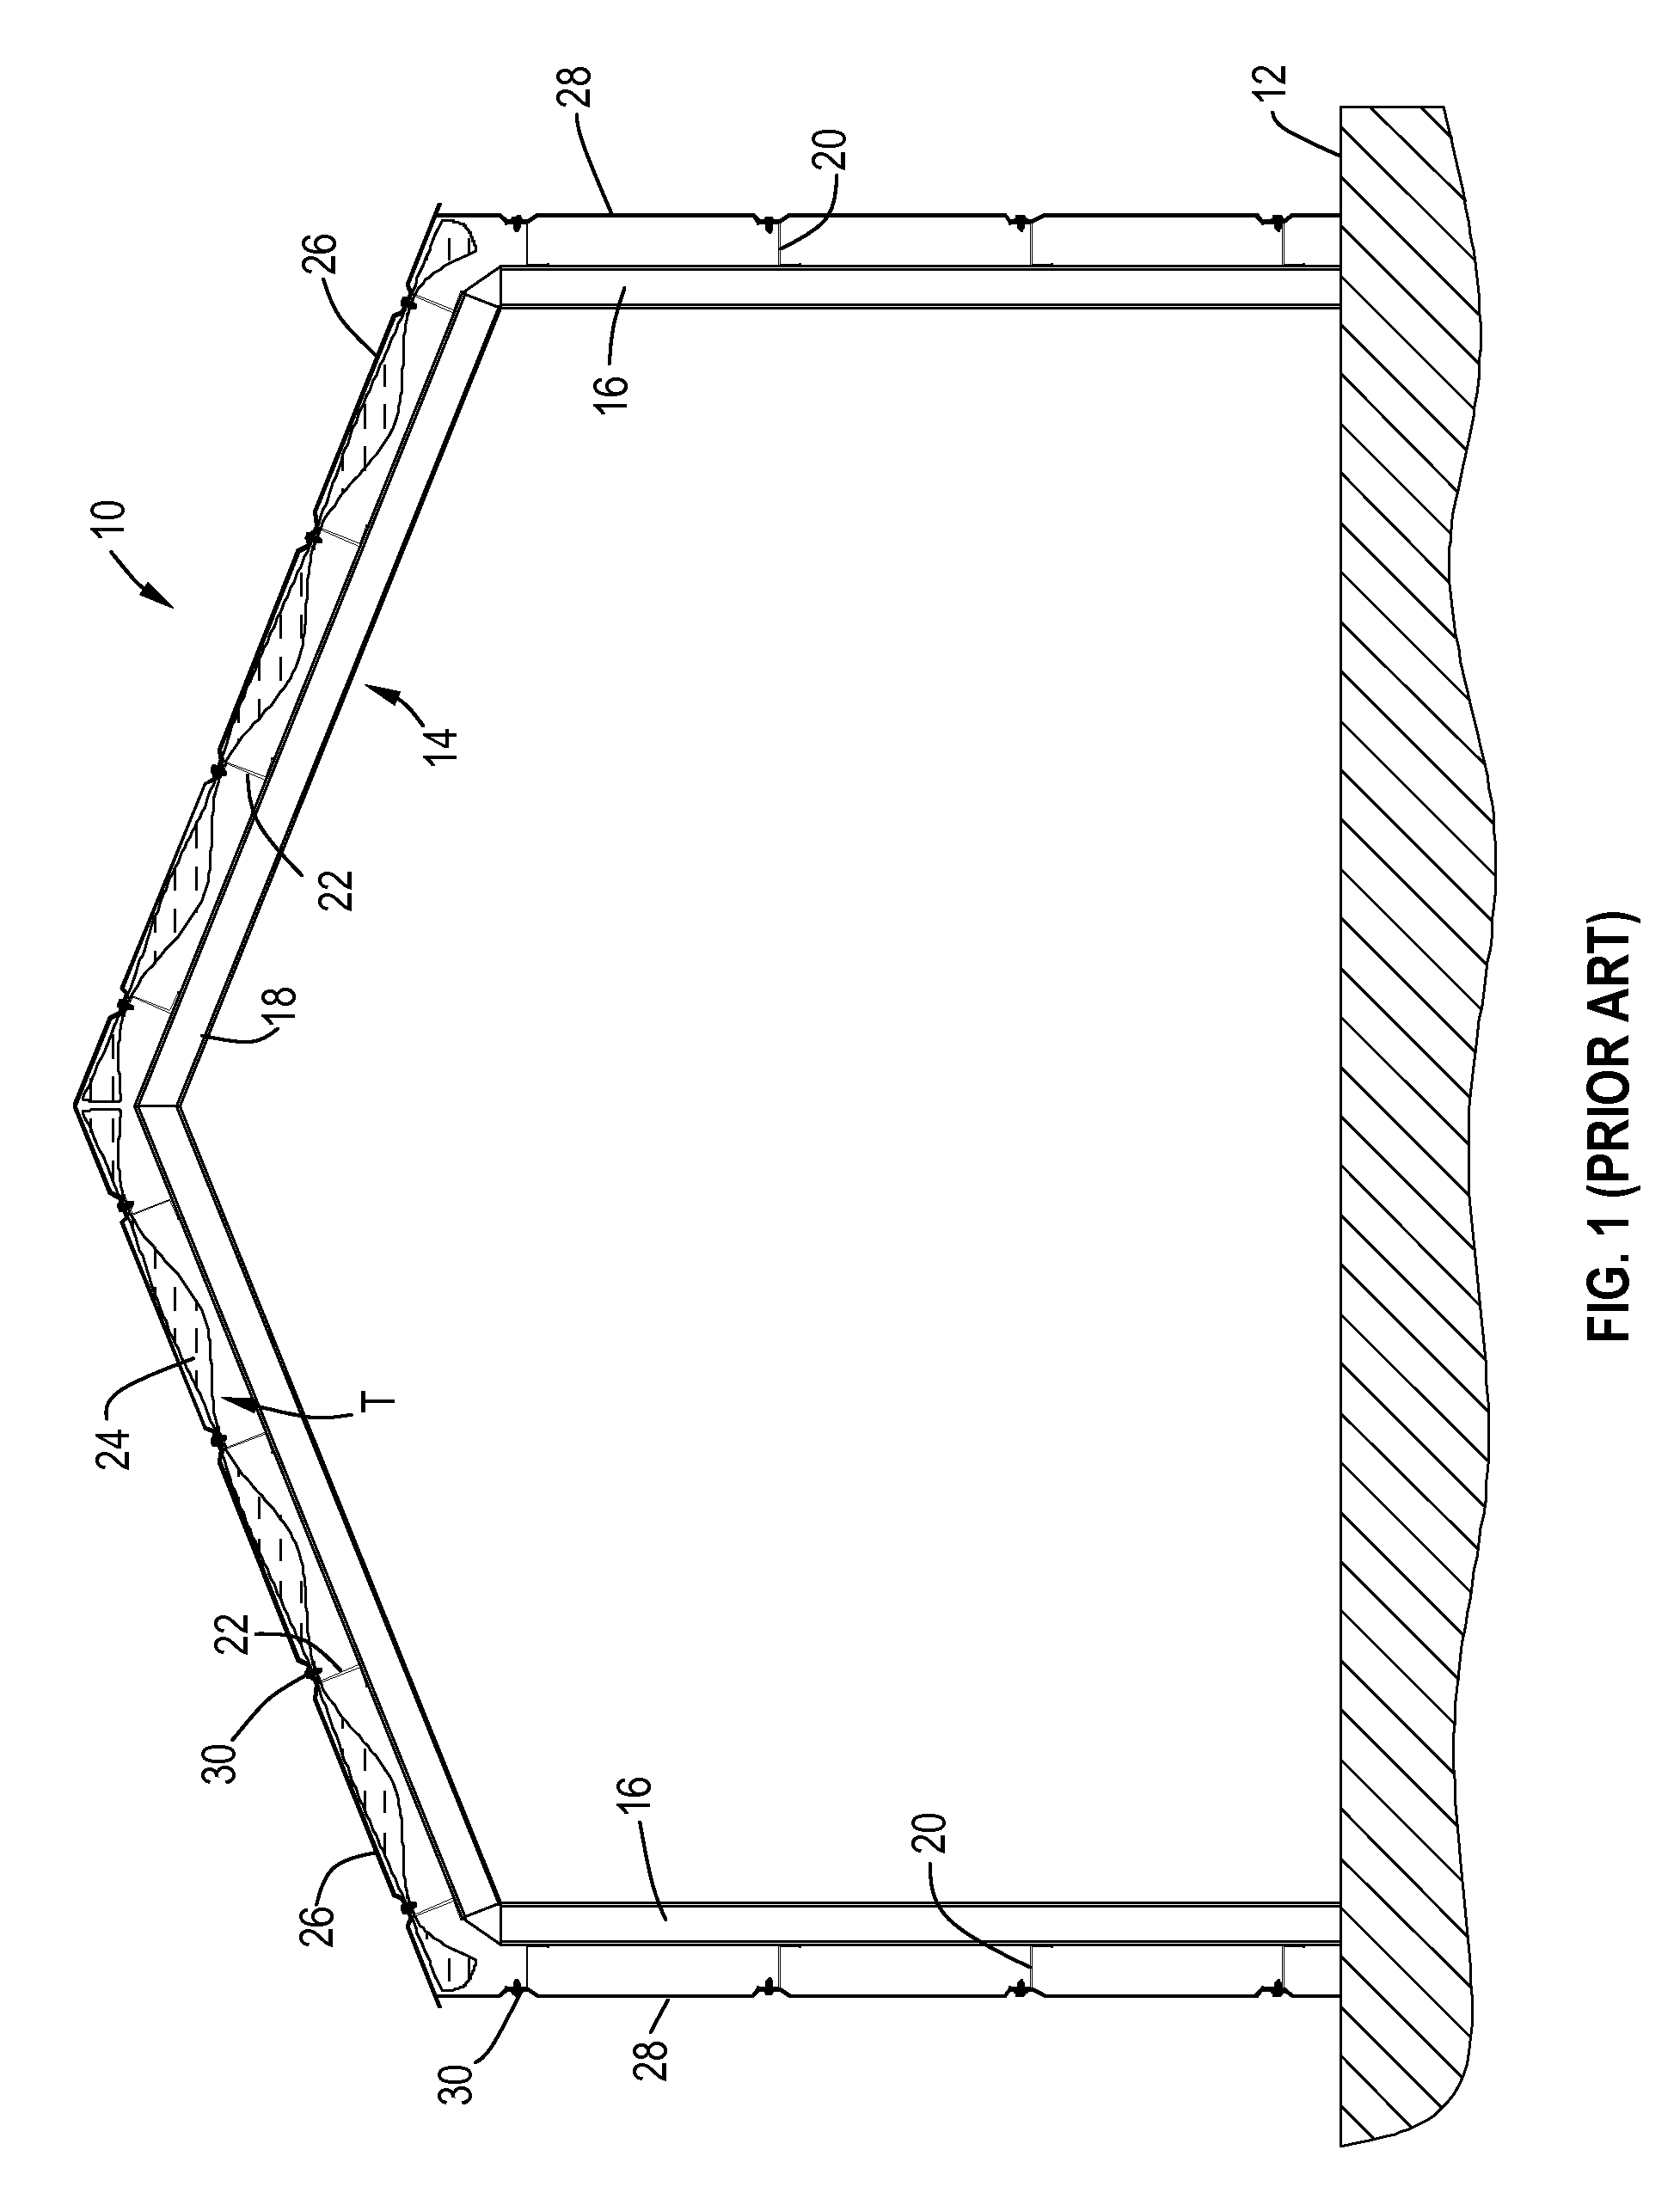 Insulated building structure and apparatus therefor